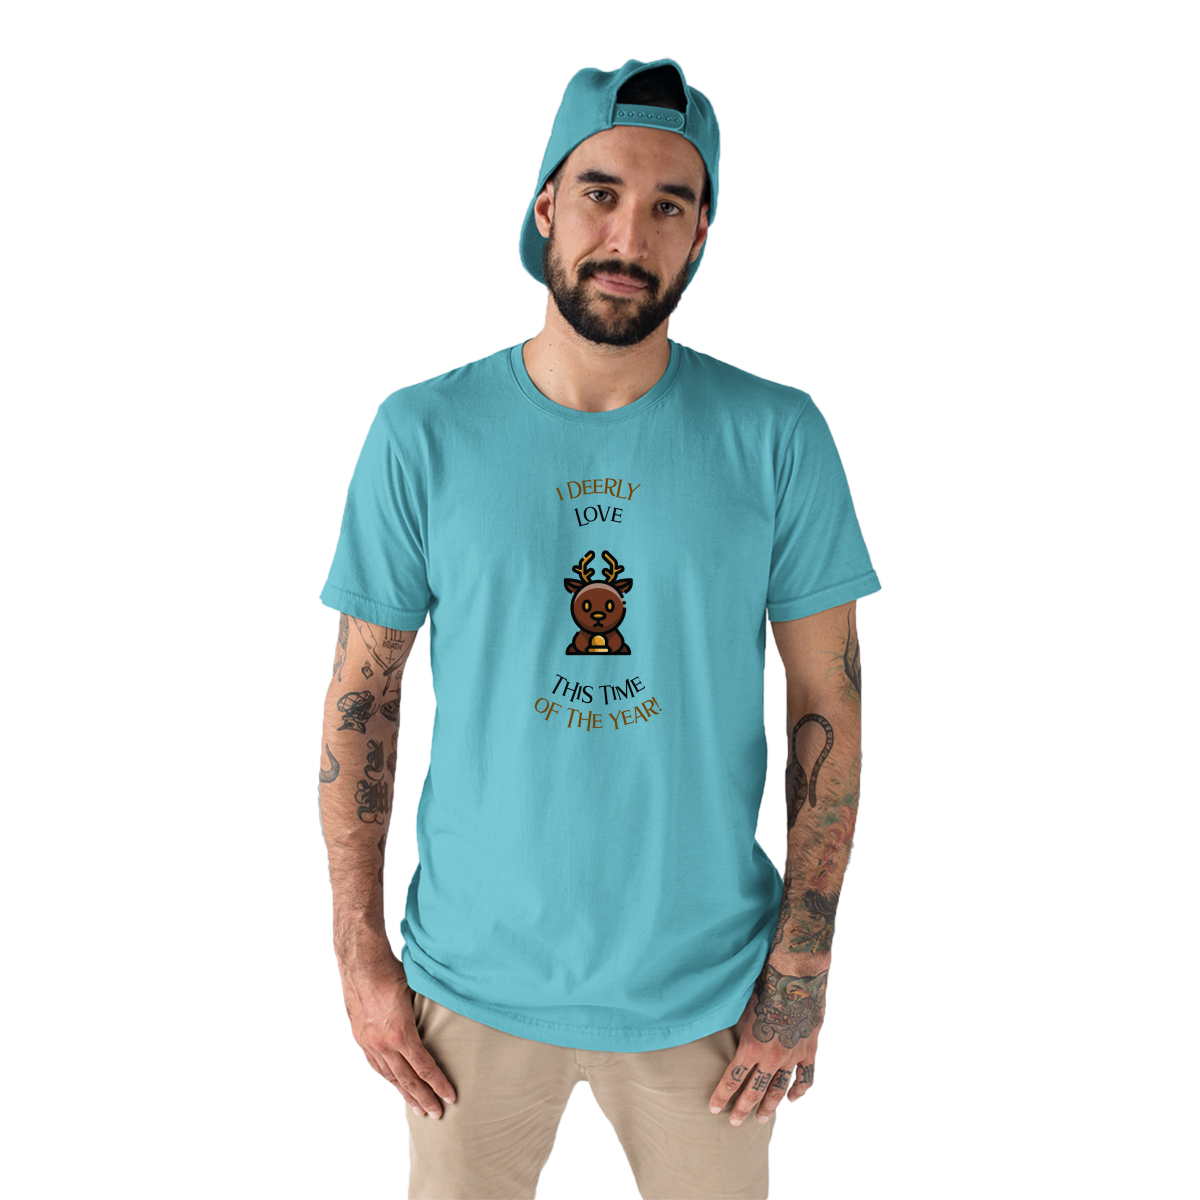 I Deerly Love This Time of the Year! Men's T-shirt | Turquoise